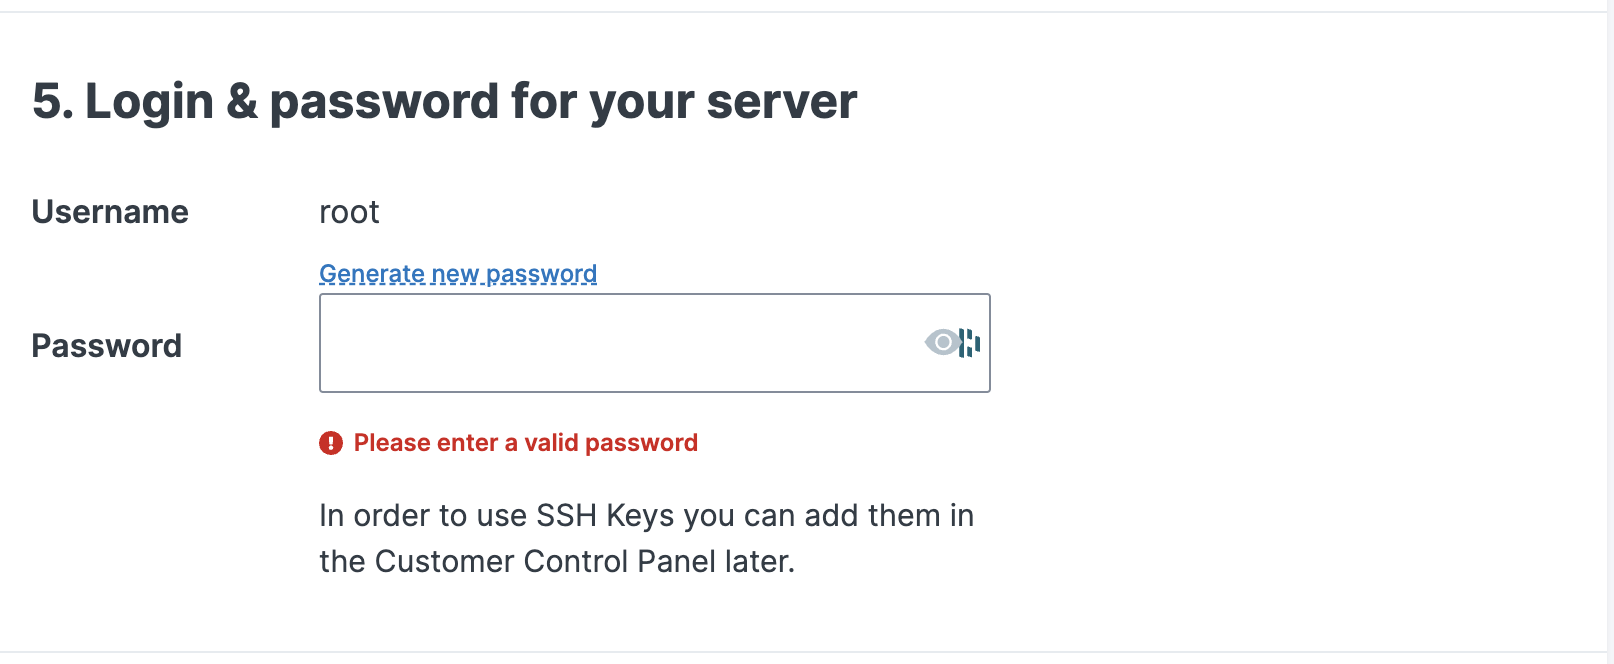 Select a password for YOUR SERVER.